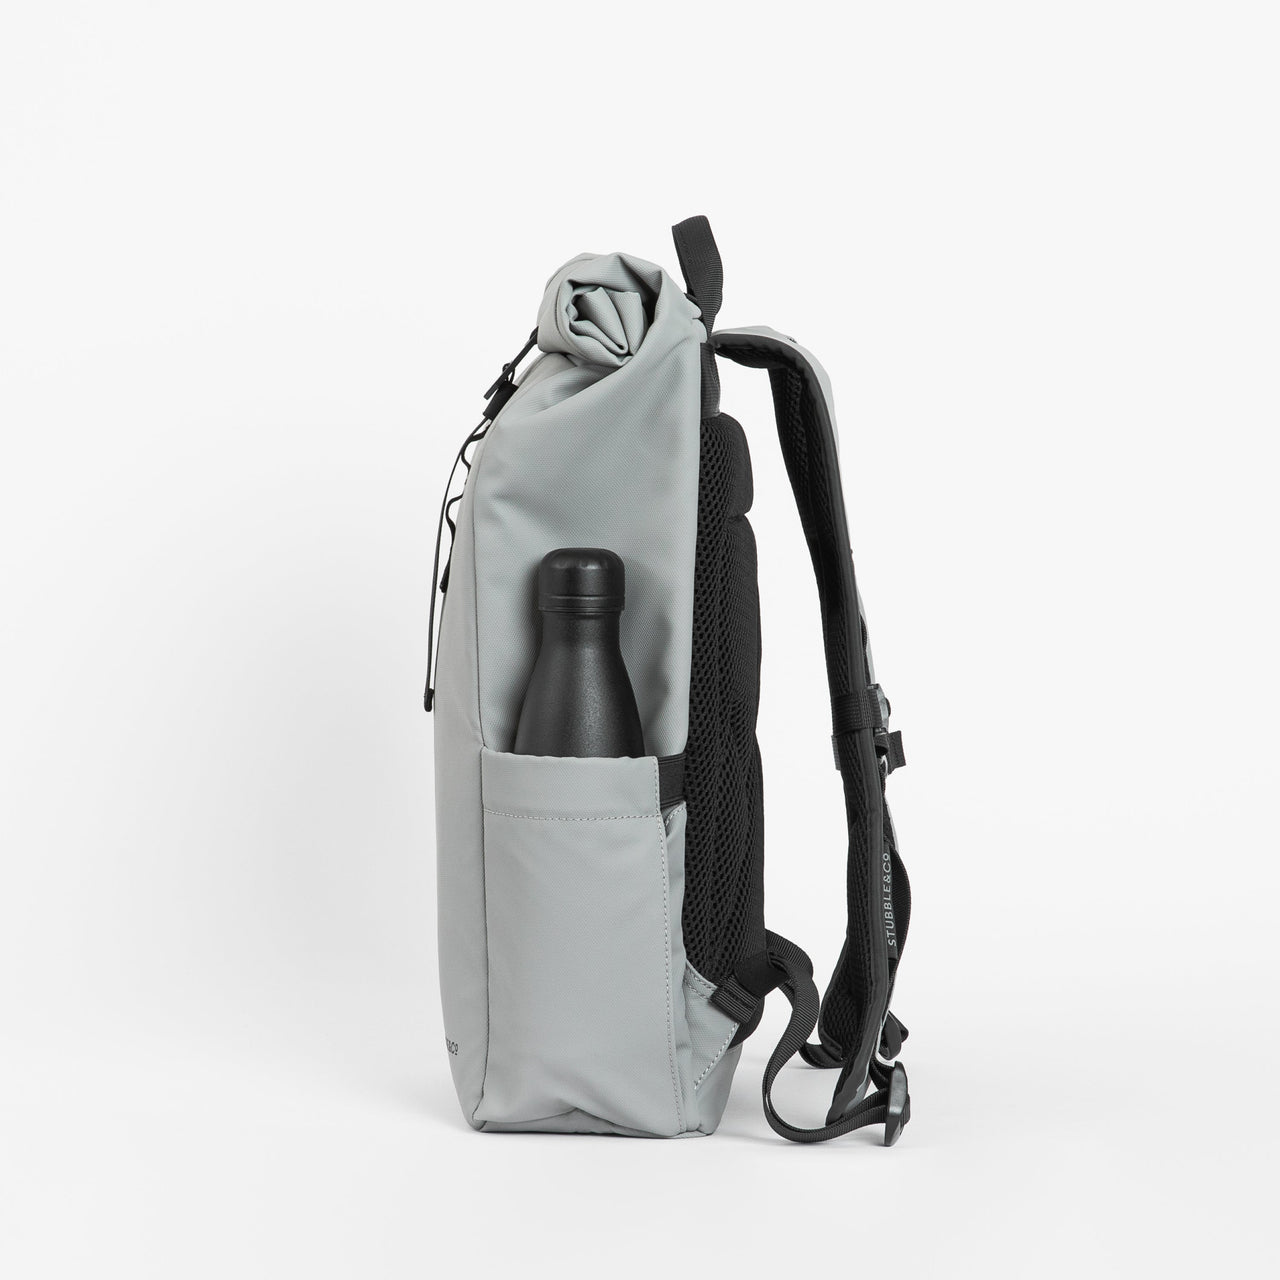 Roll Top Mini backpack in Concrete